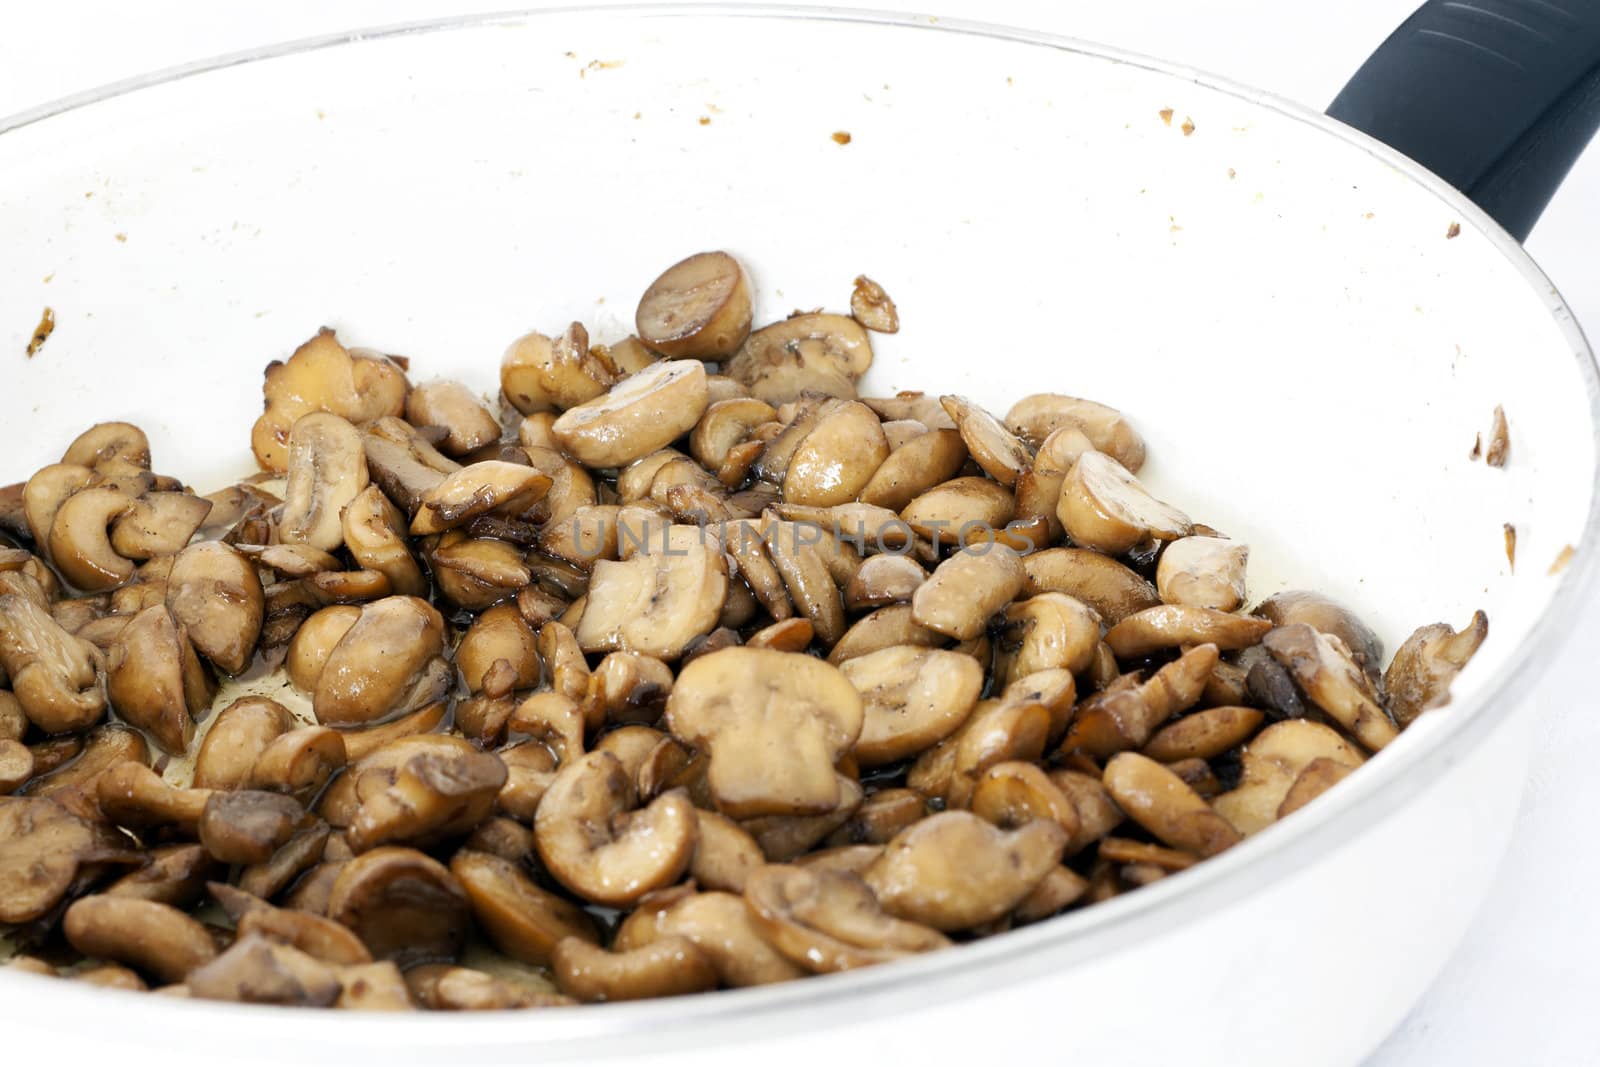 Fried (champignon) mushrooms in oil in a white pan